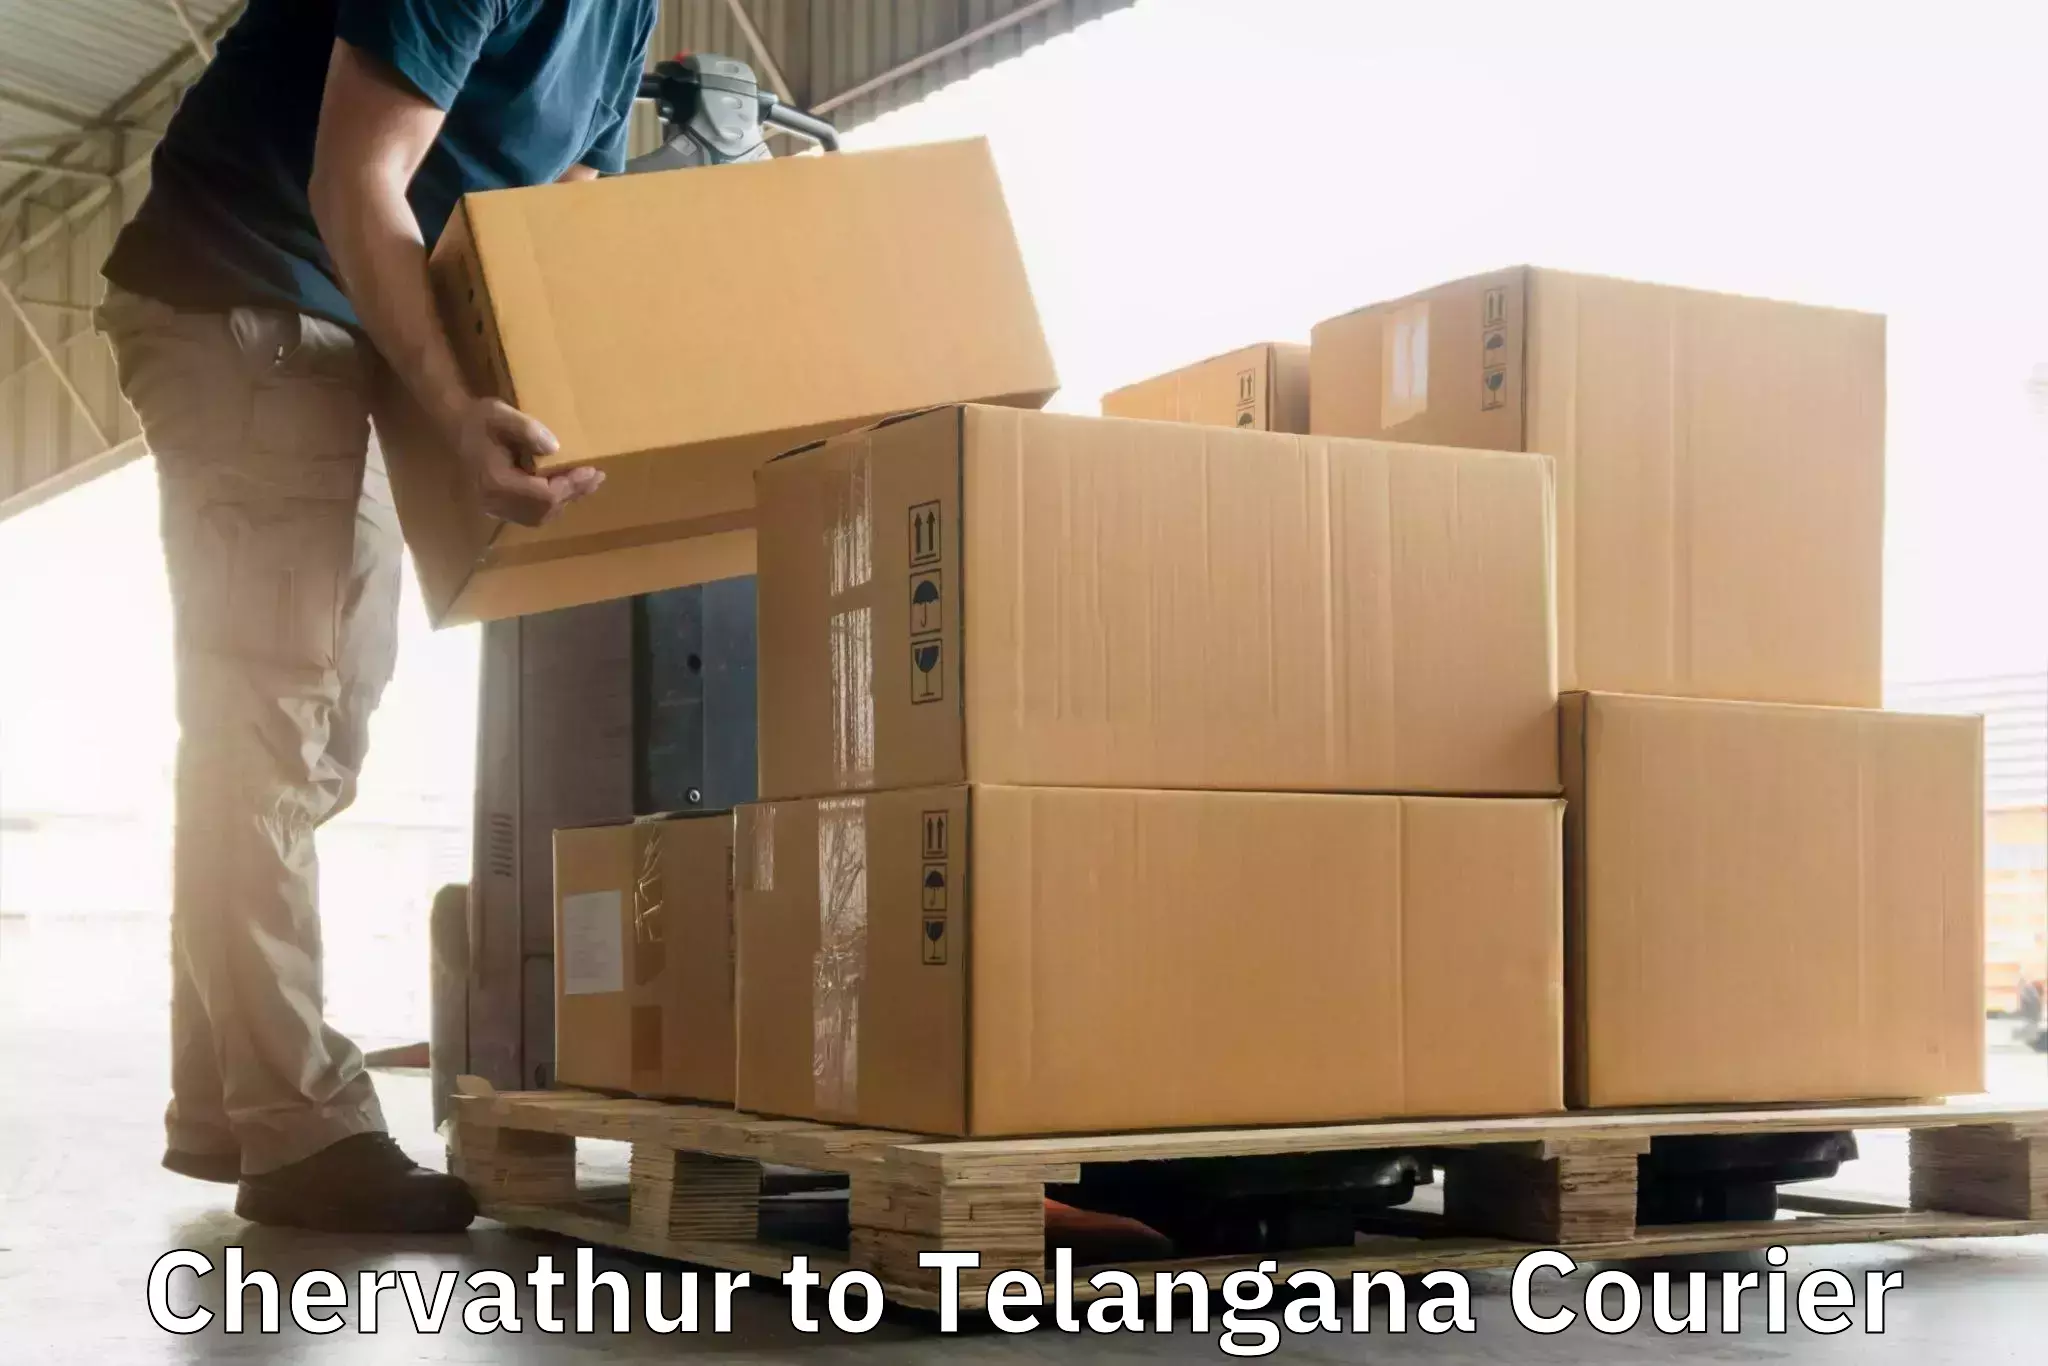 Optimized delivery routes Chervathur to Dharmapuri Jagtial